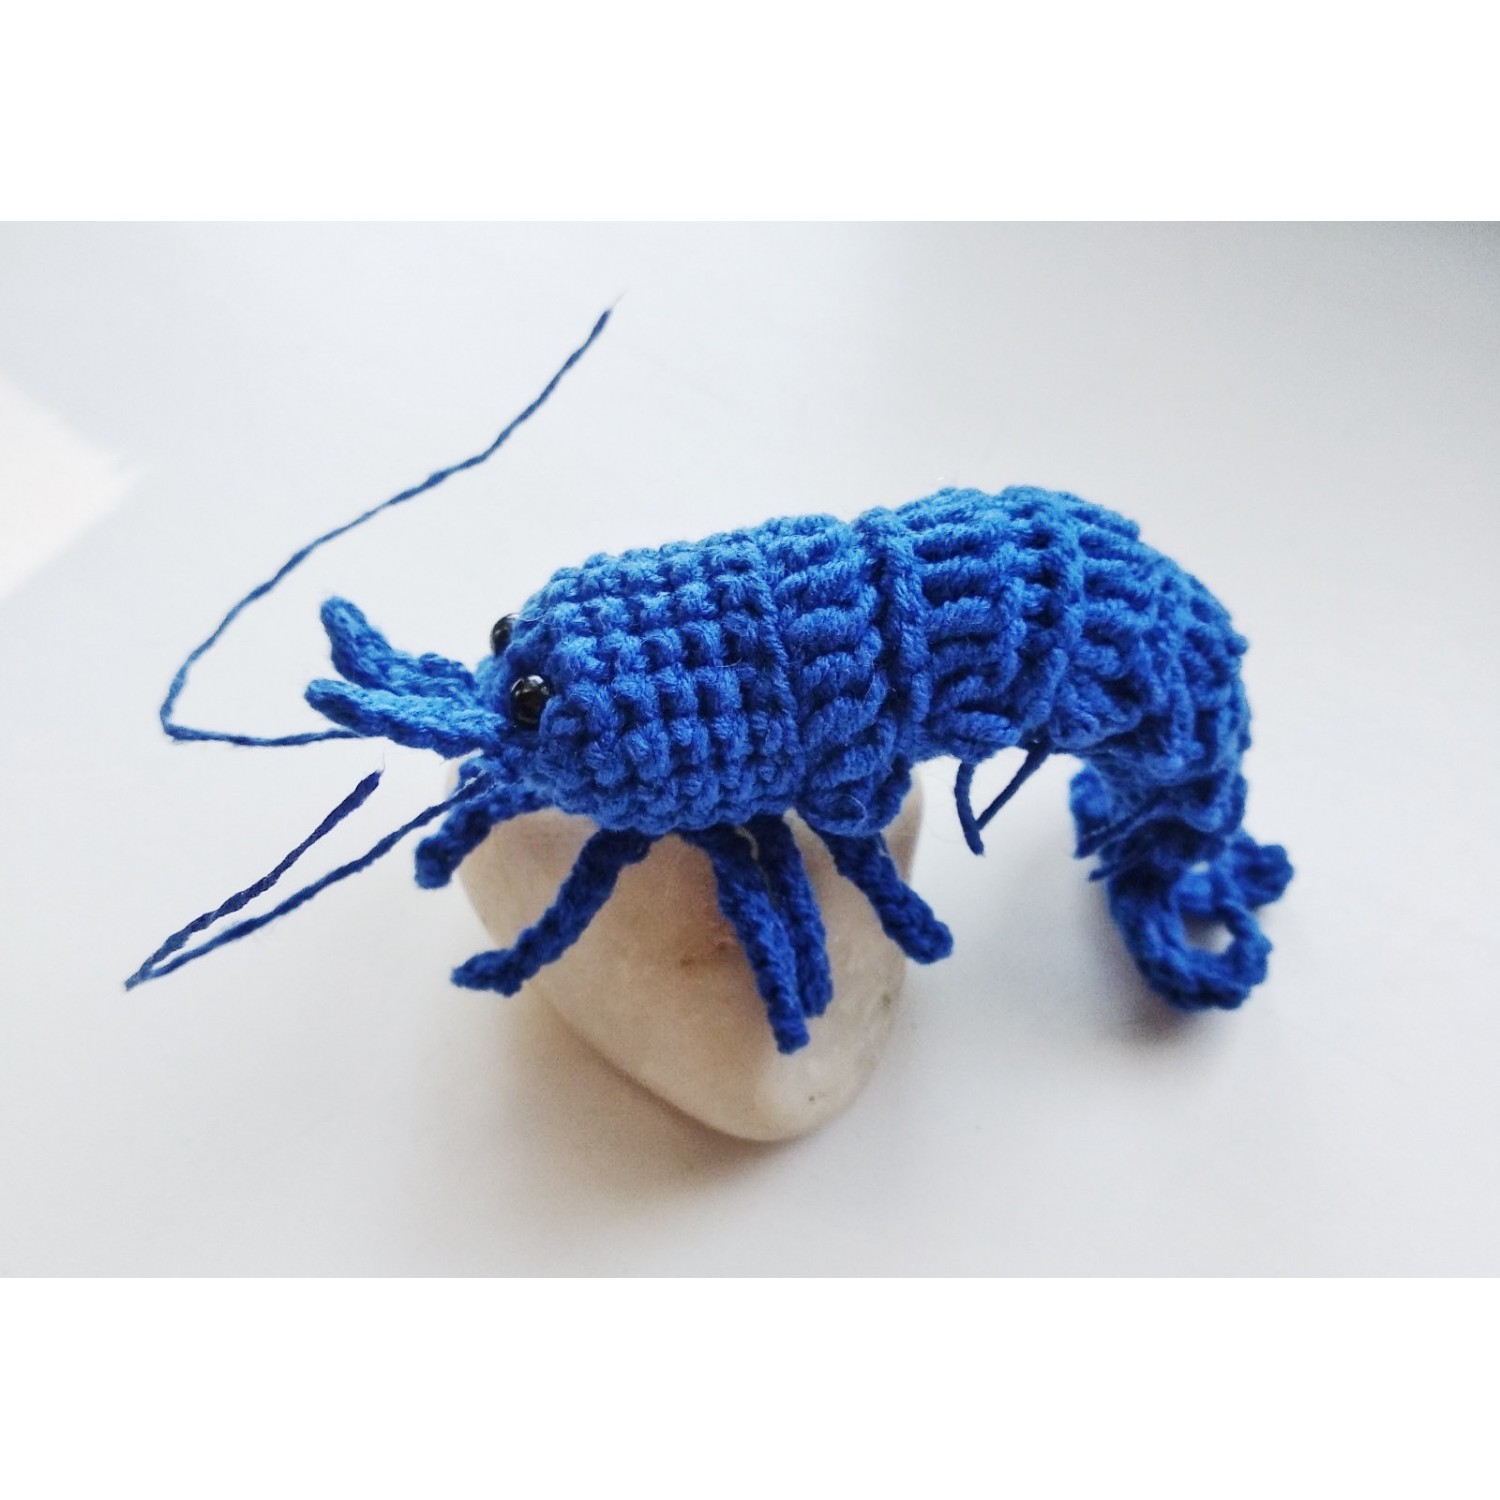 plastic toy shrimp, plastic toy shrimp Suppliers and Manufacturers at